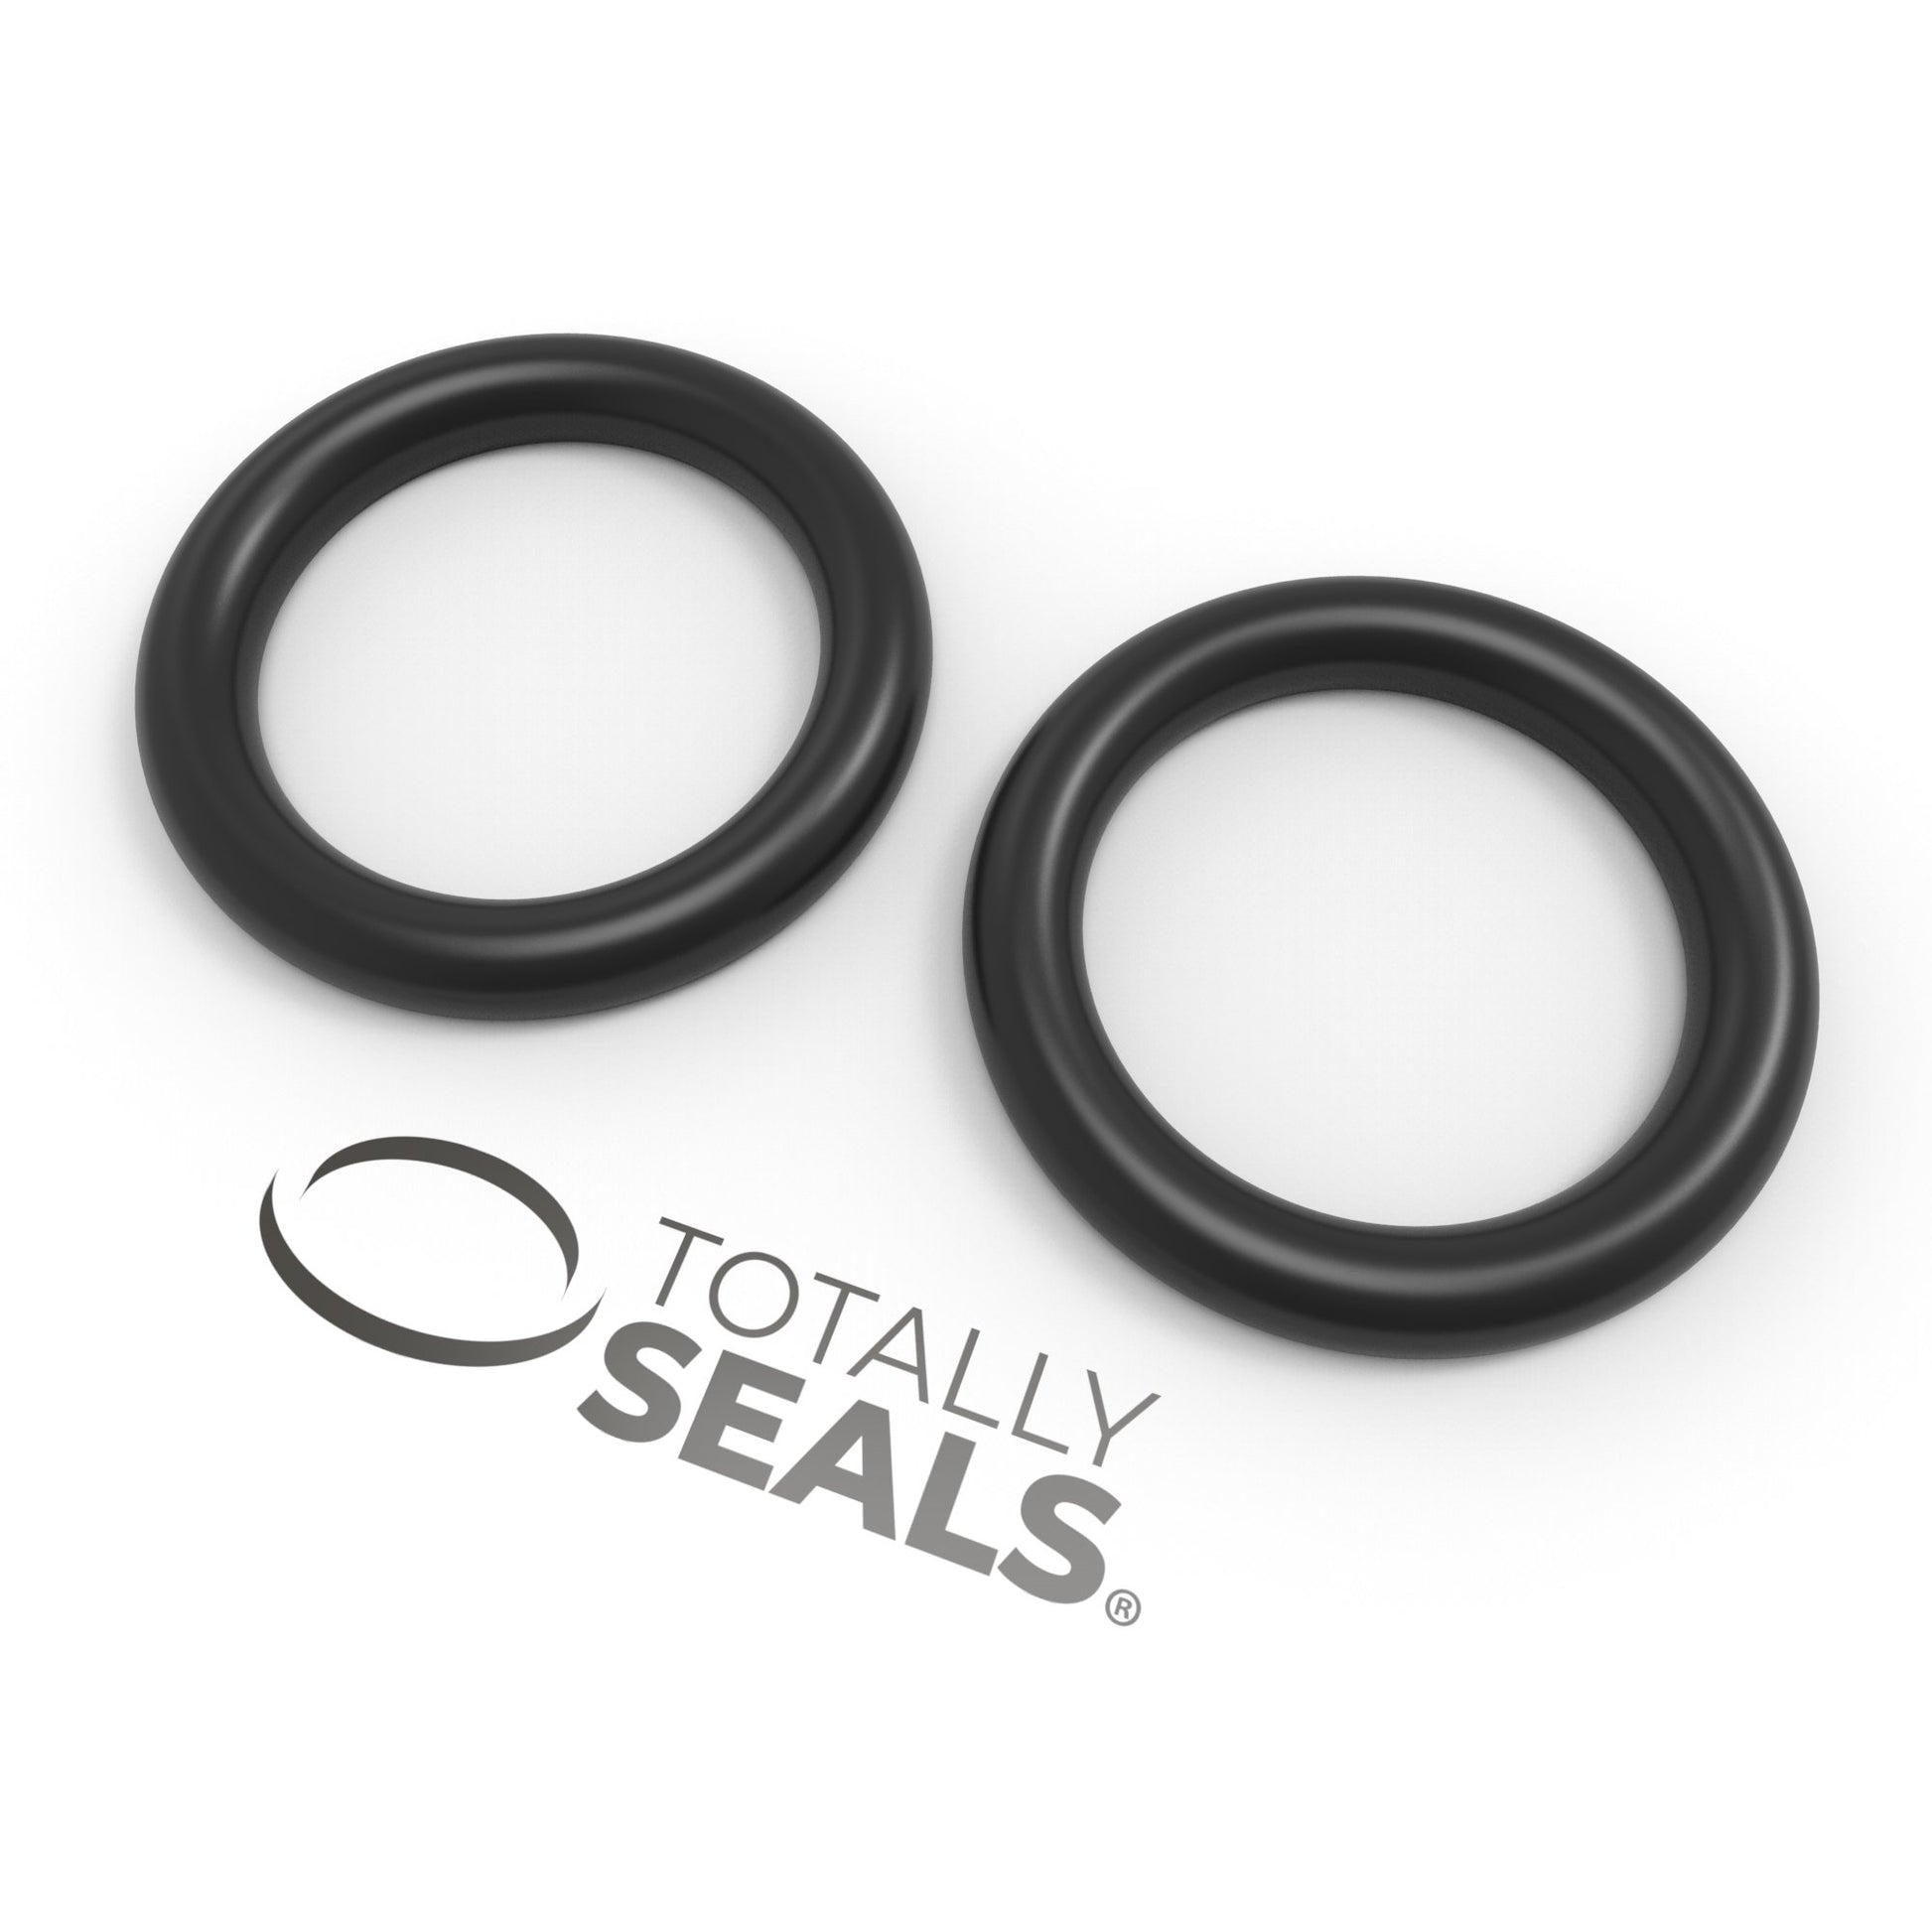 1-5/8" x 3/16" (BS326) Imperial Nitrile O-Rings - Totally Seals®